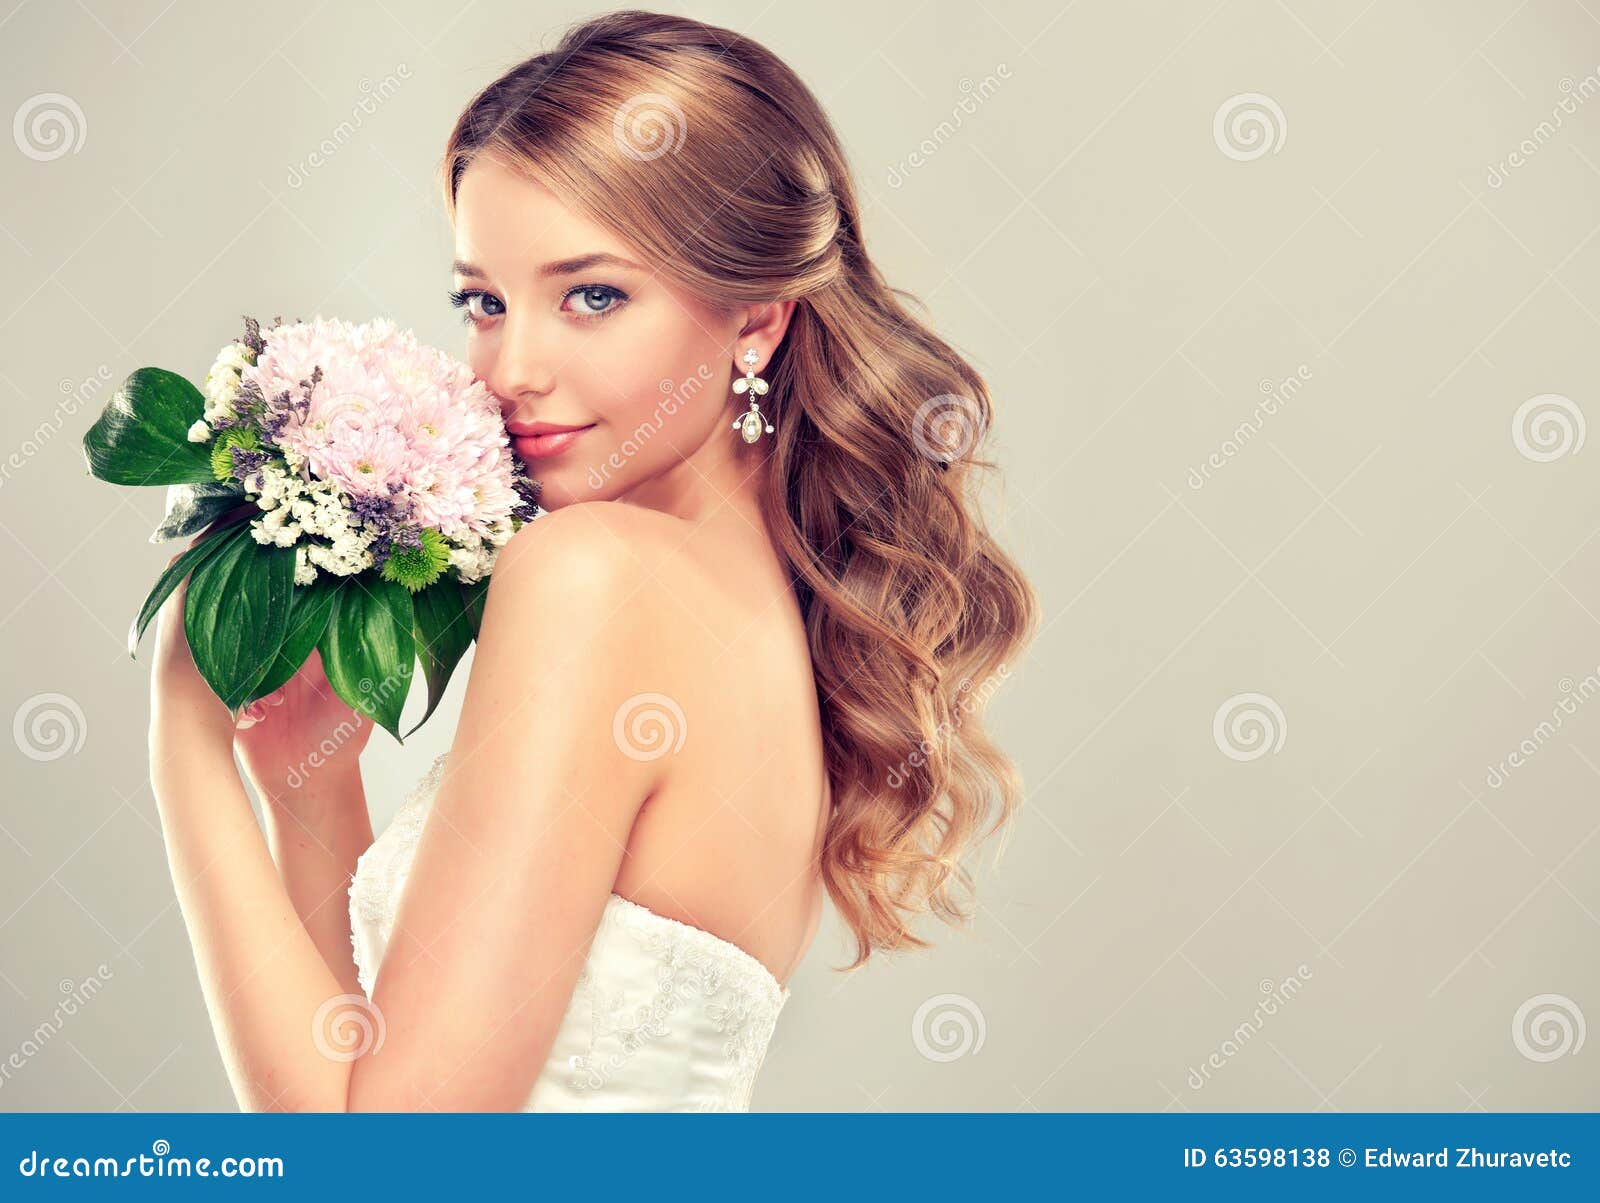 girl bride in wedding dress with elegant hairstyle.